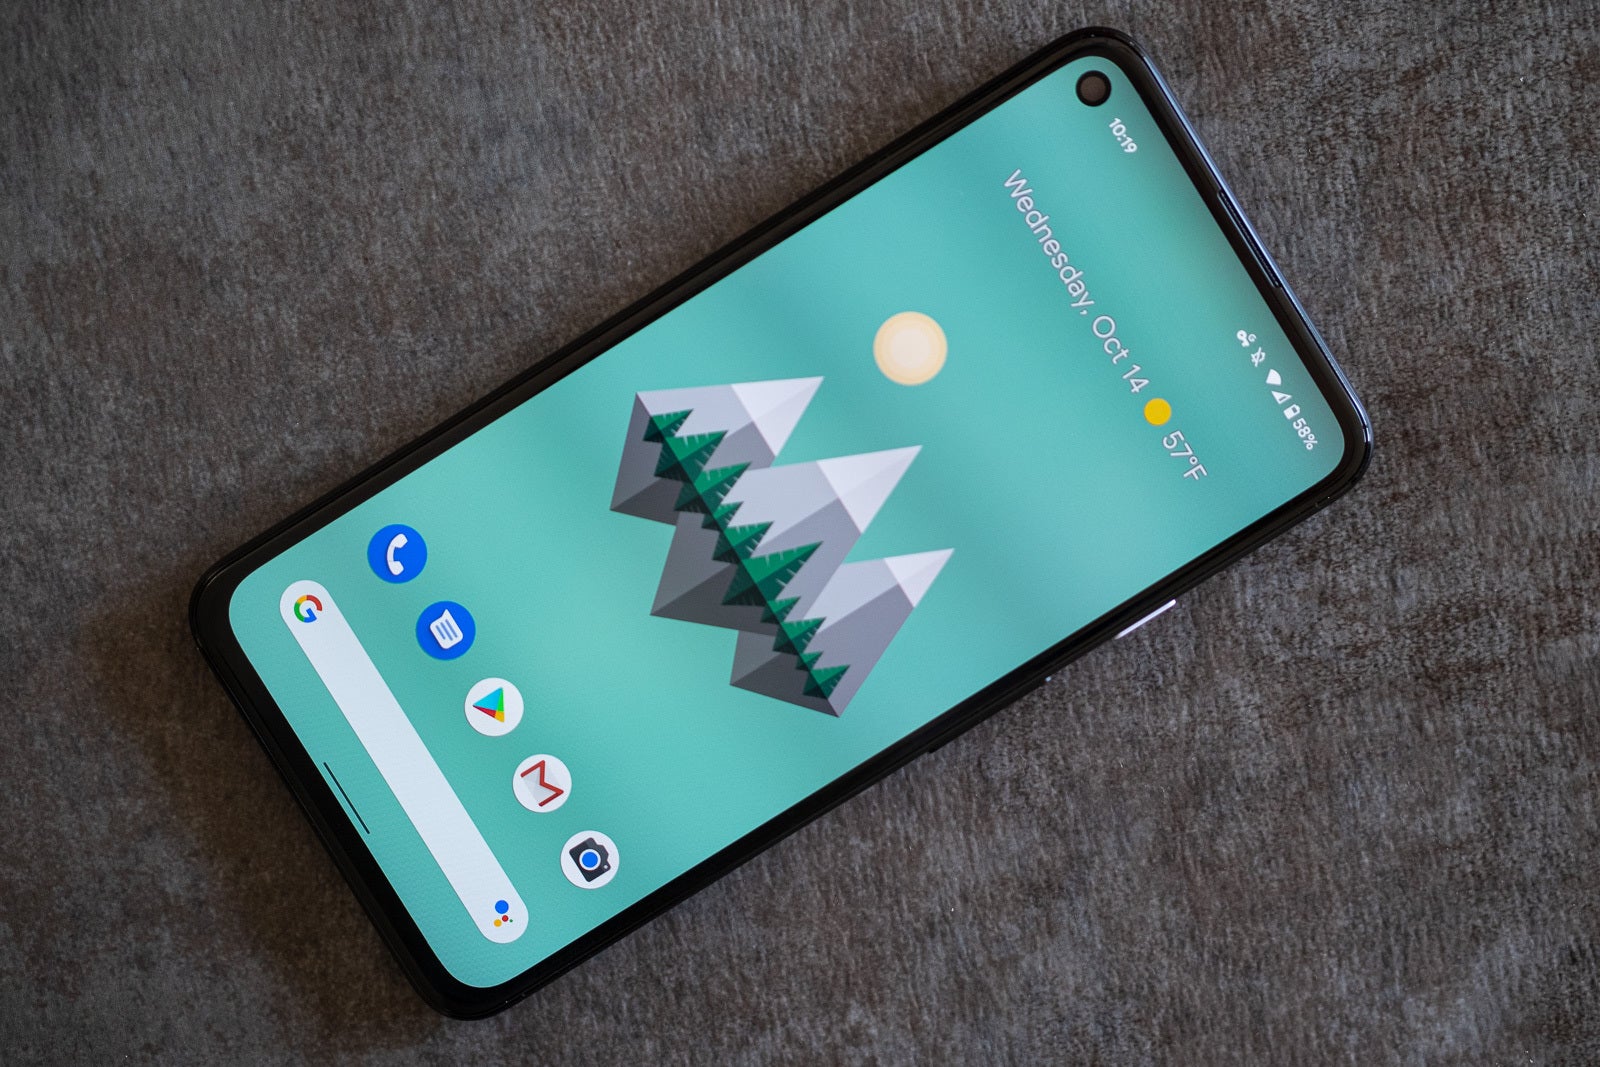 Google Pixel 4a (5G) Review: The Pixel for everyone